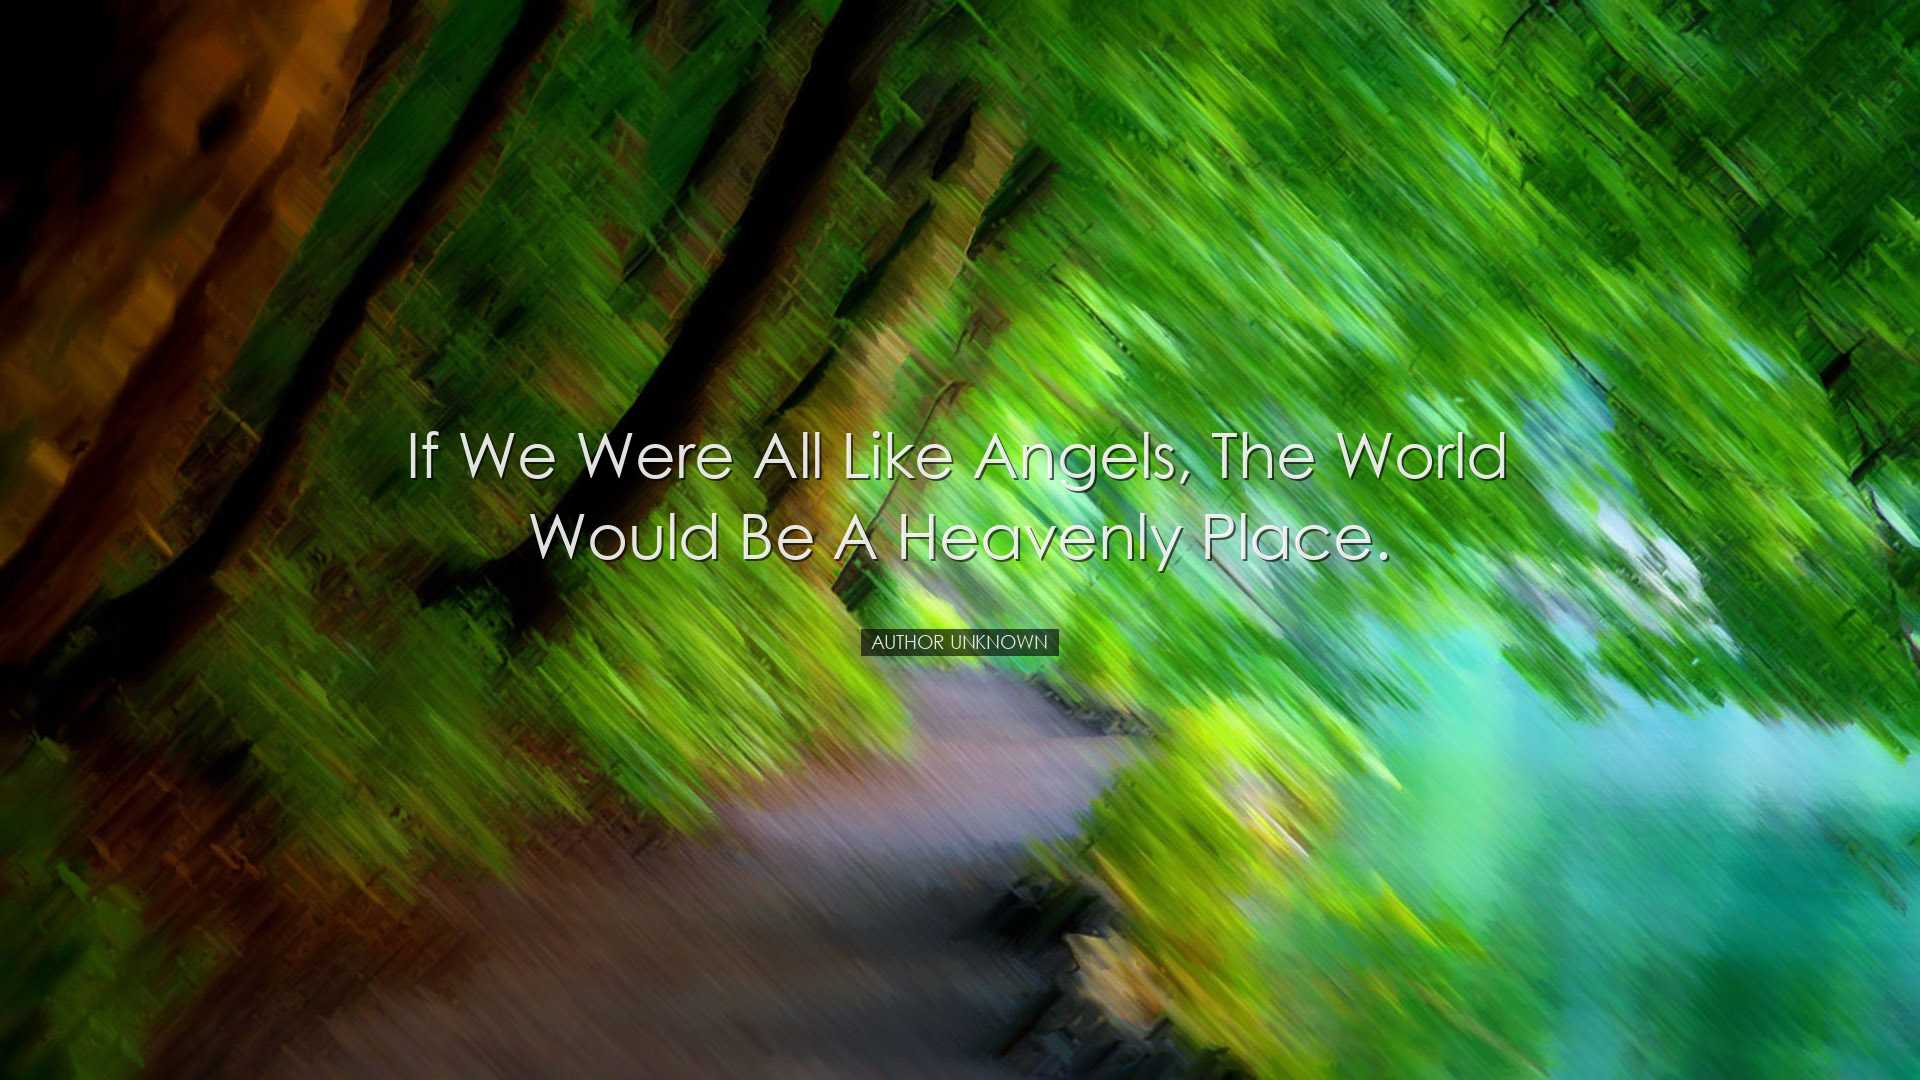 If we were all like angels, the world would be a heavenly place. -